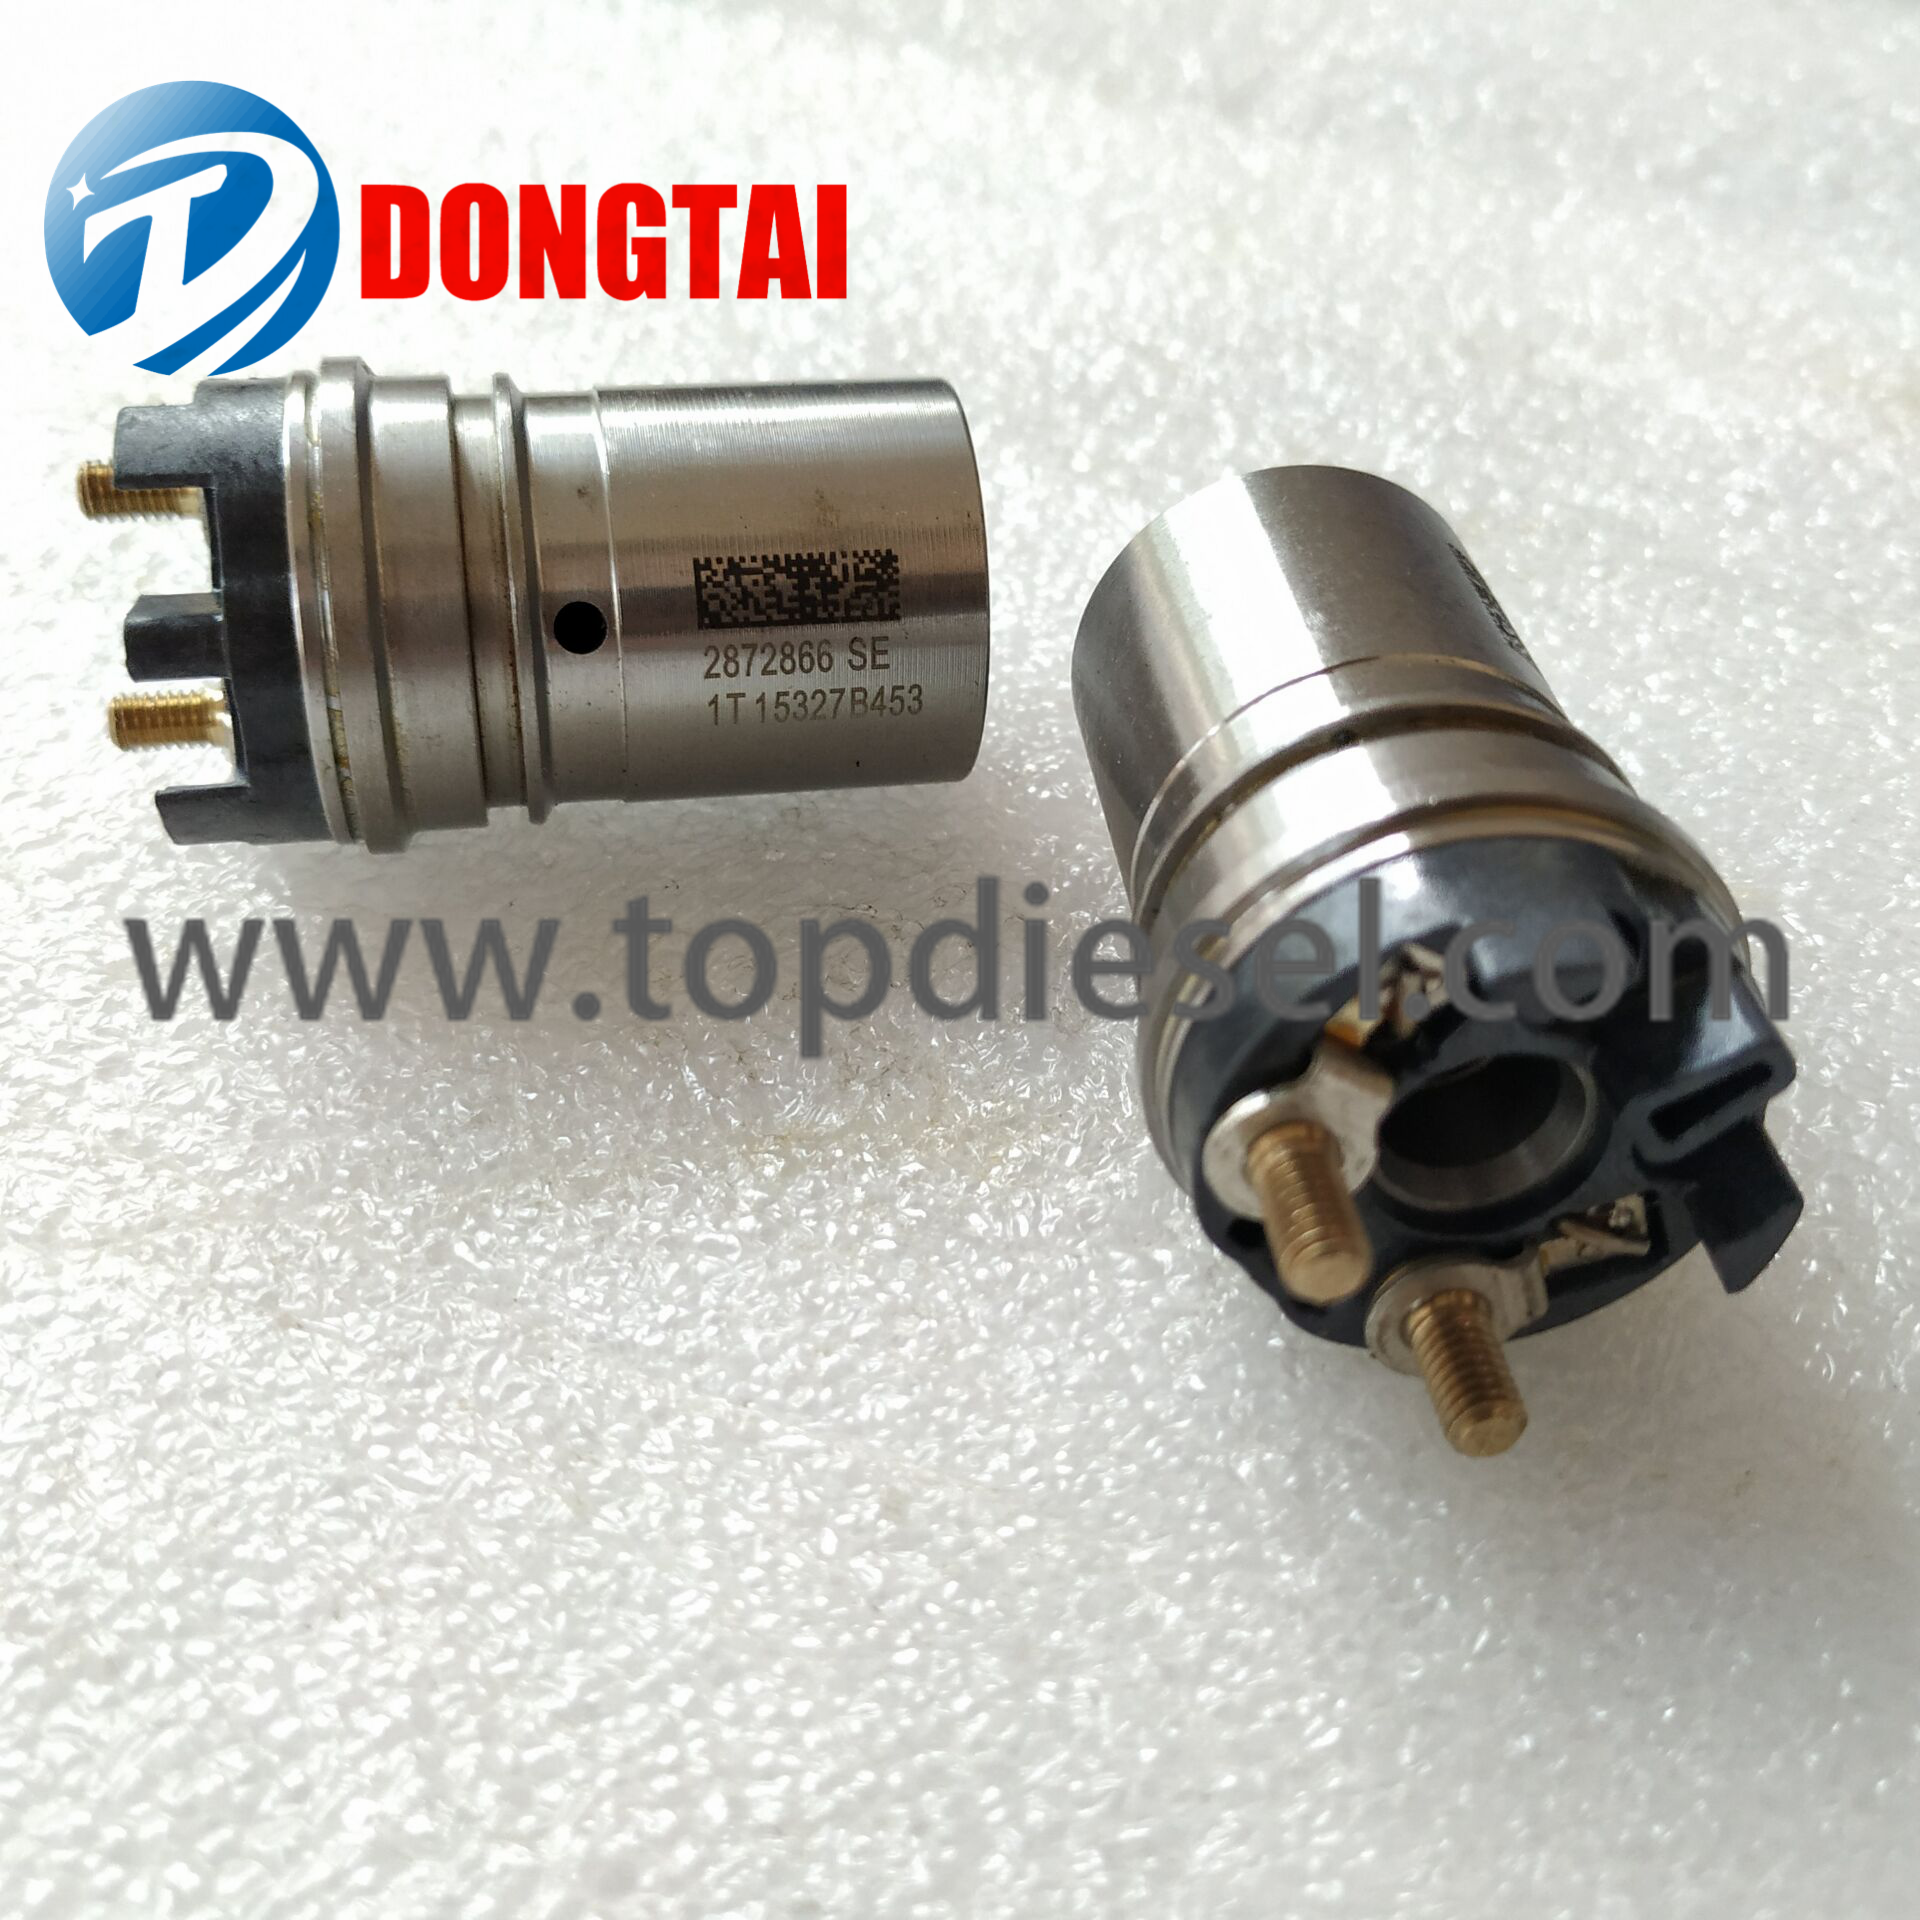 Free sample for Fuel Injector Cleaning Machine - No,523(2)2872866 Solenoid – Dongtai